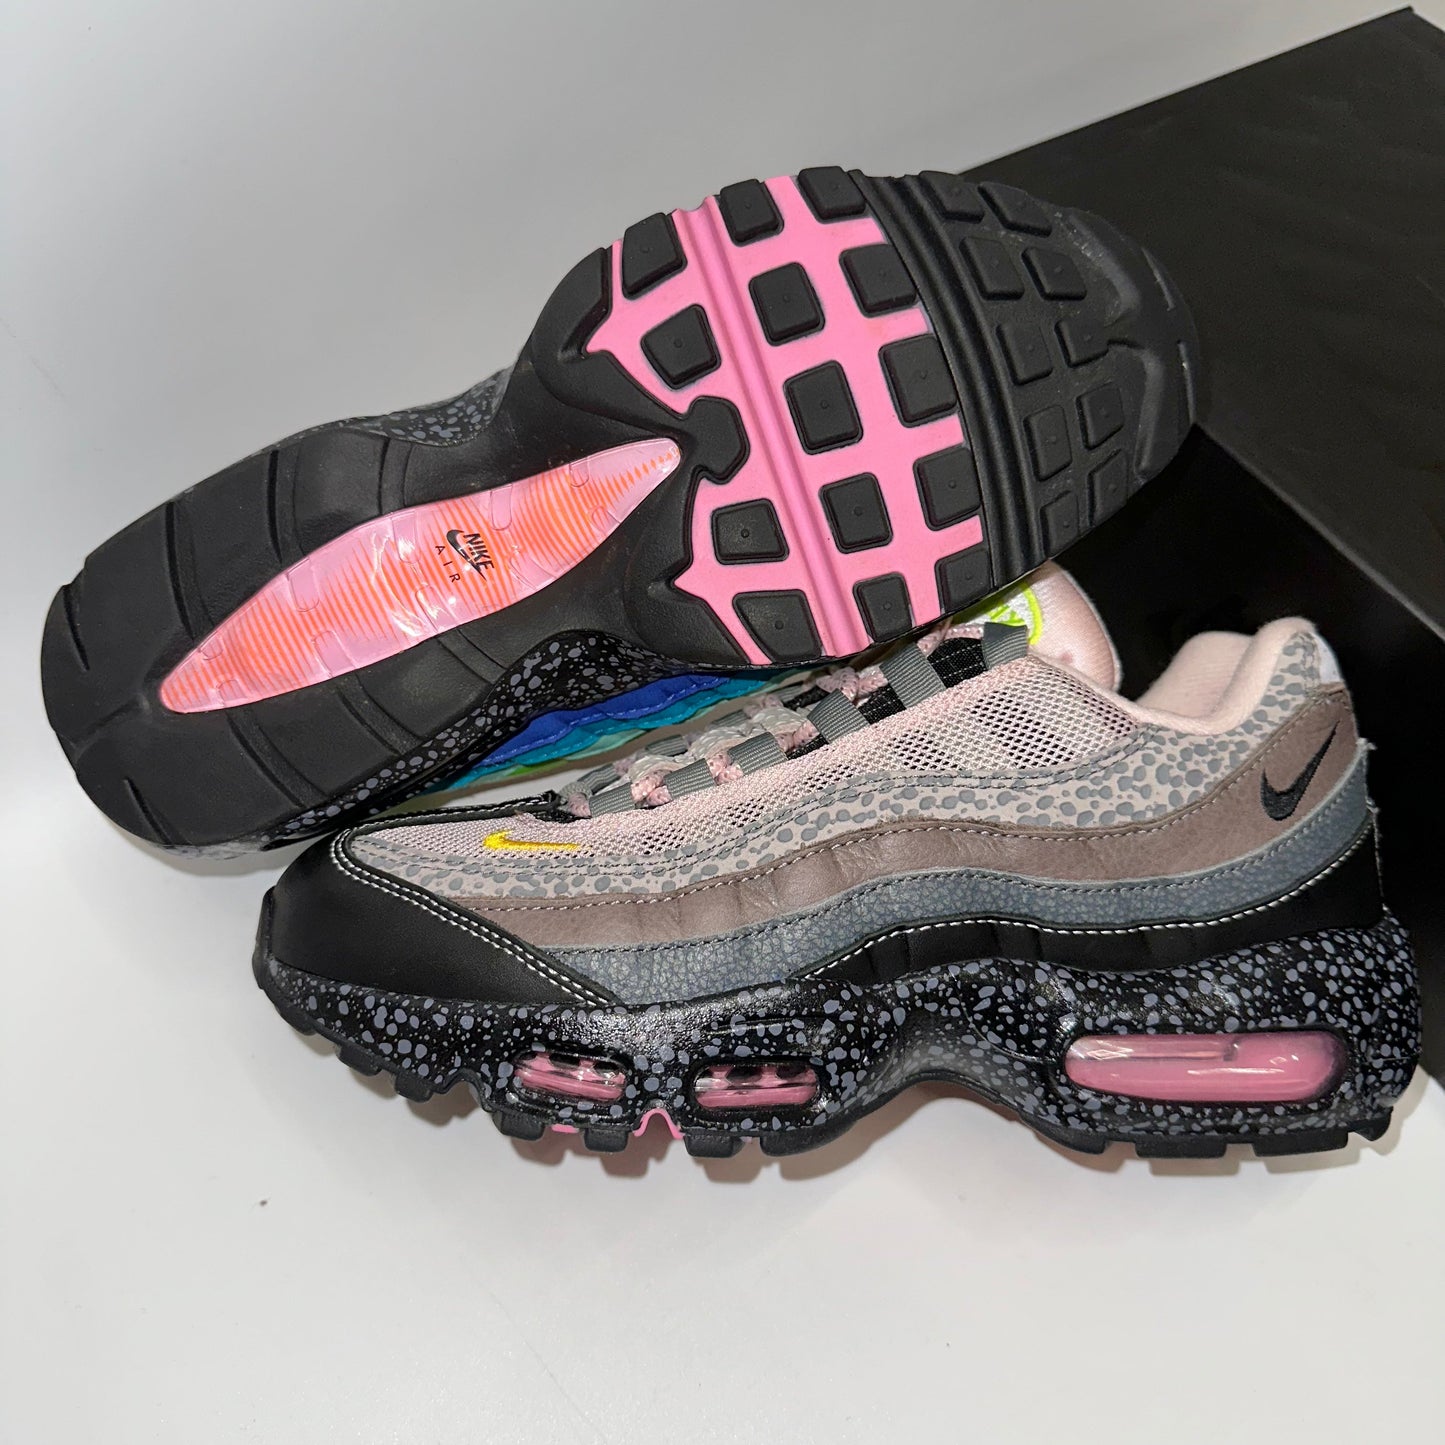 Used Air Max 95 Size? 20 For 20 Air Max Day 2020 (UK6) (REP BOX)